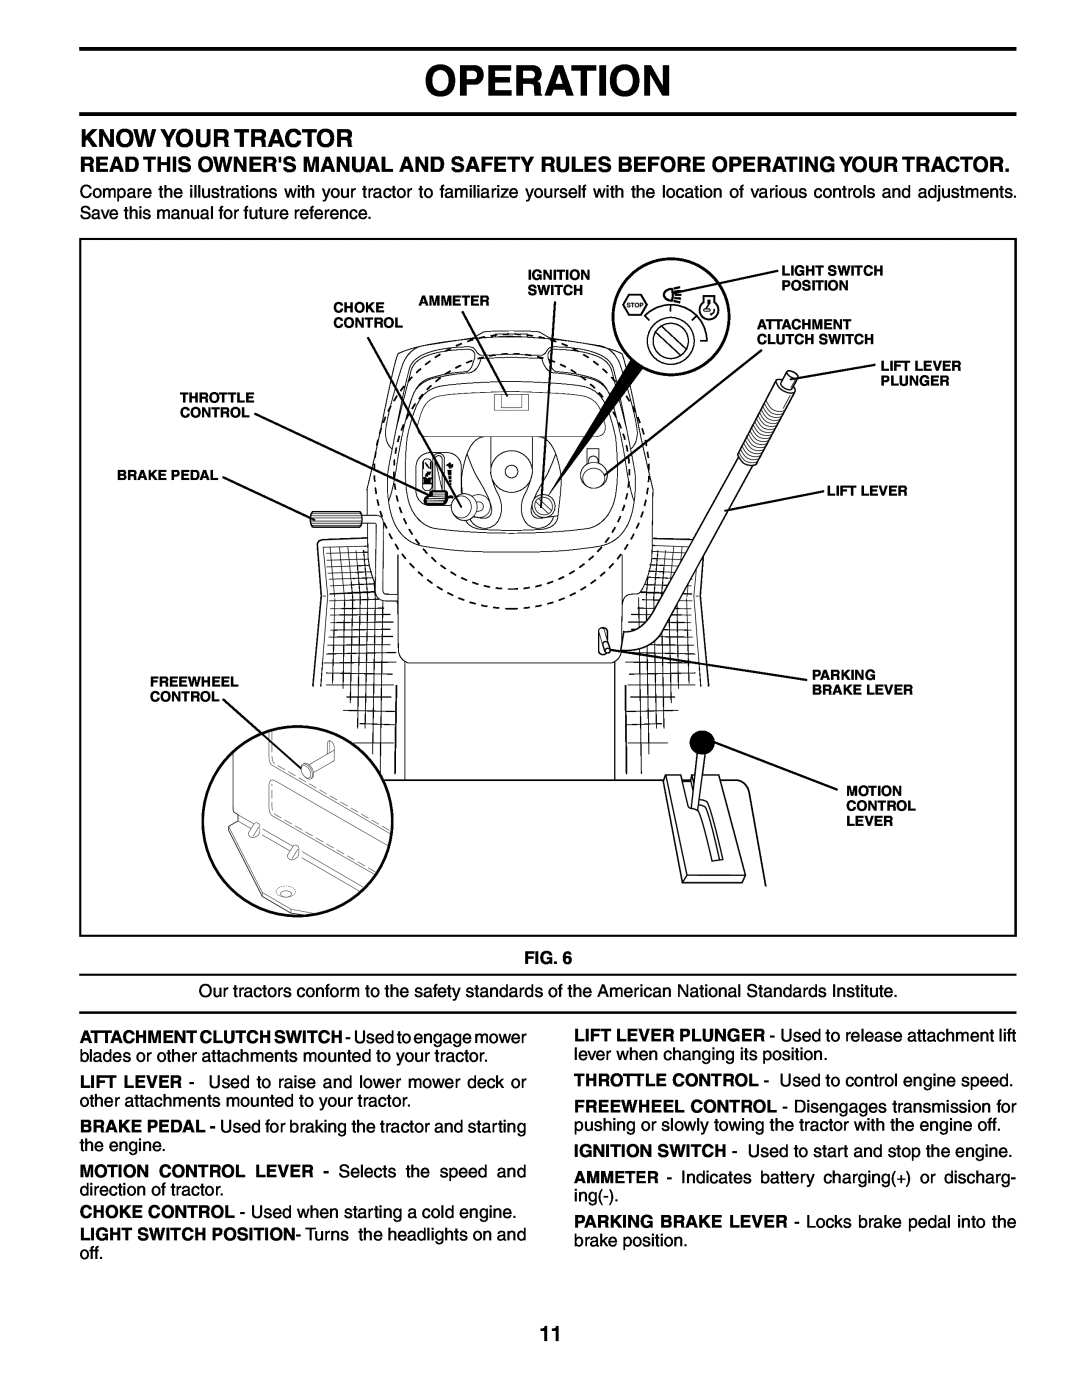 Poulan POGT20H48STA manual Know Your Tractor, Operation, MOTION CONTROL LEVER - Selects the speed and direction of tractor 